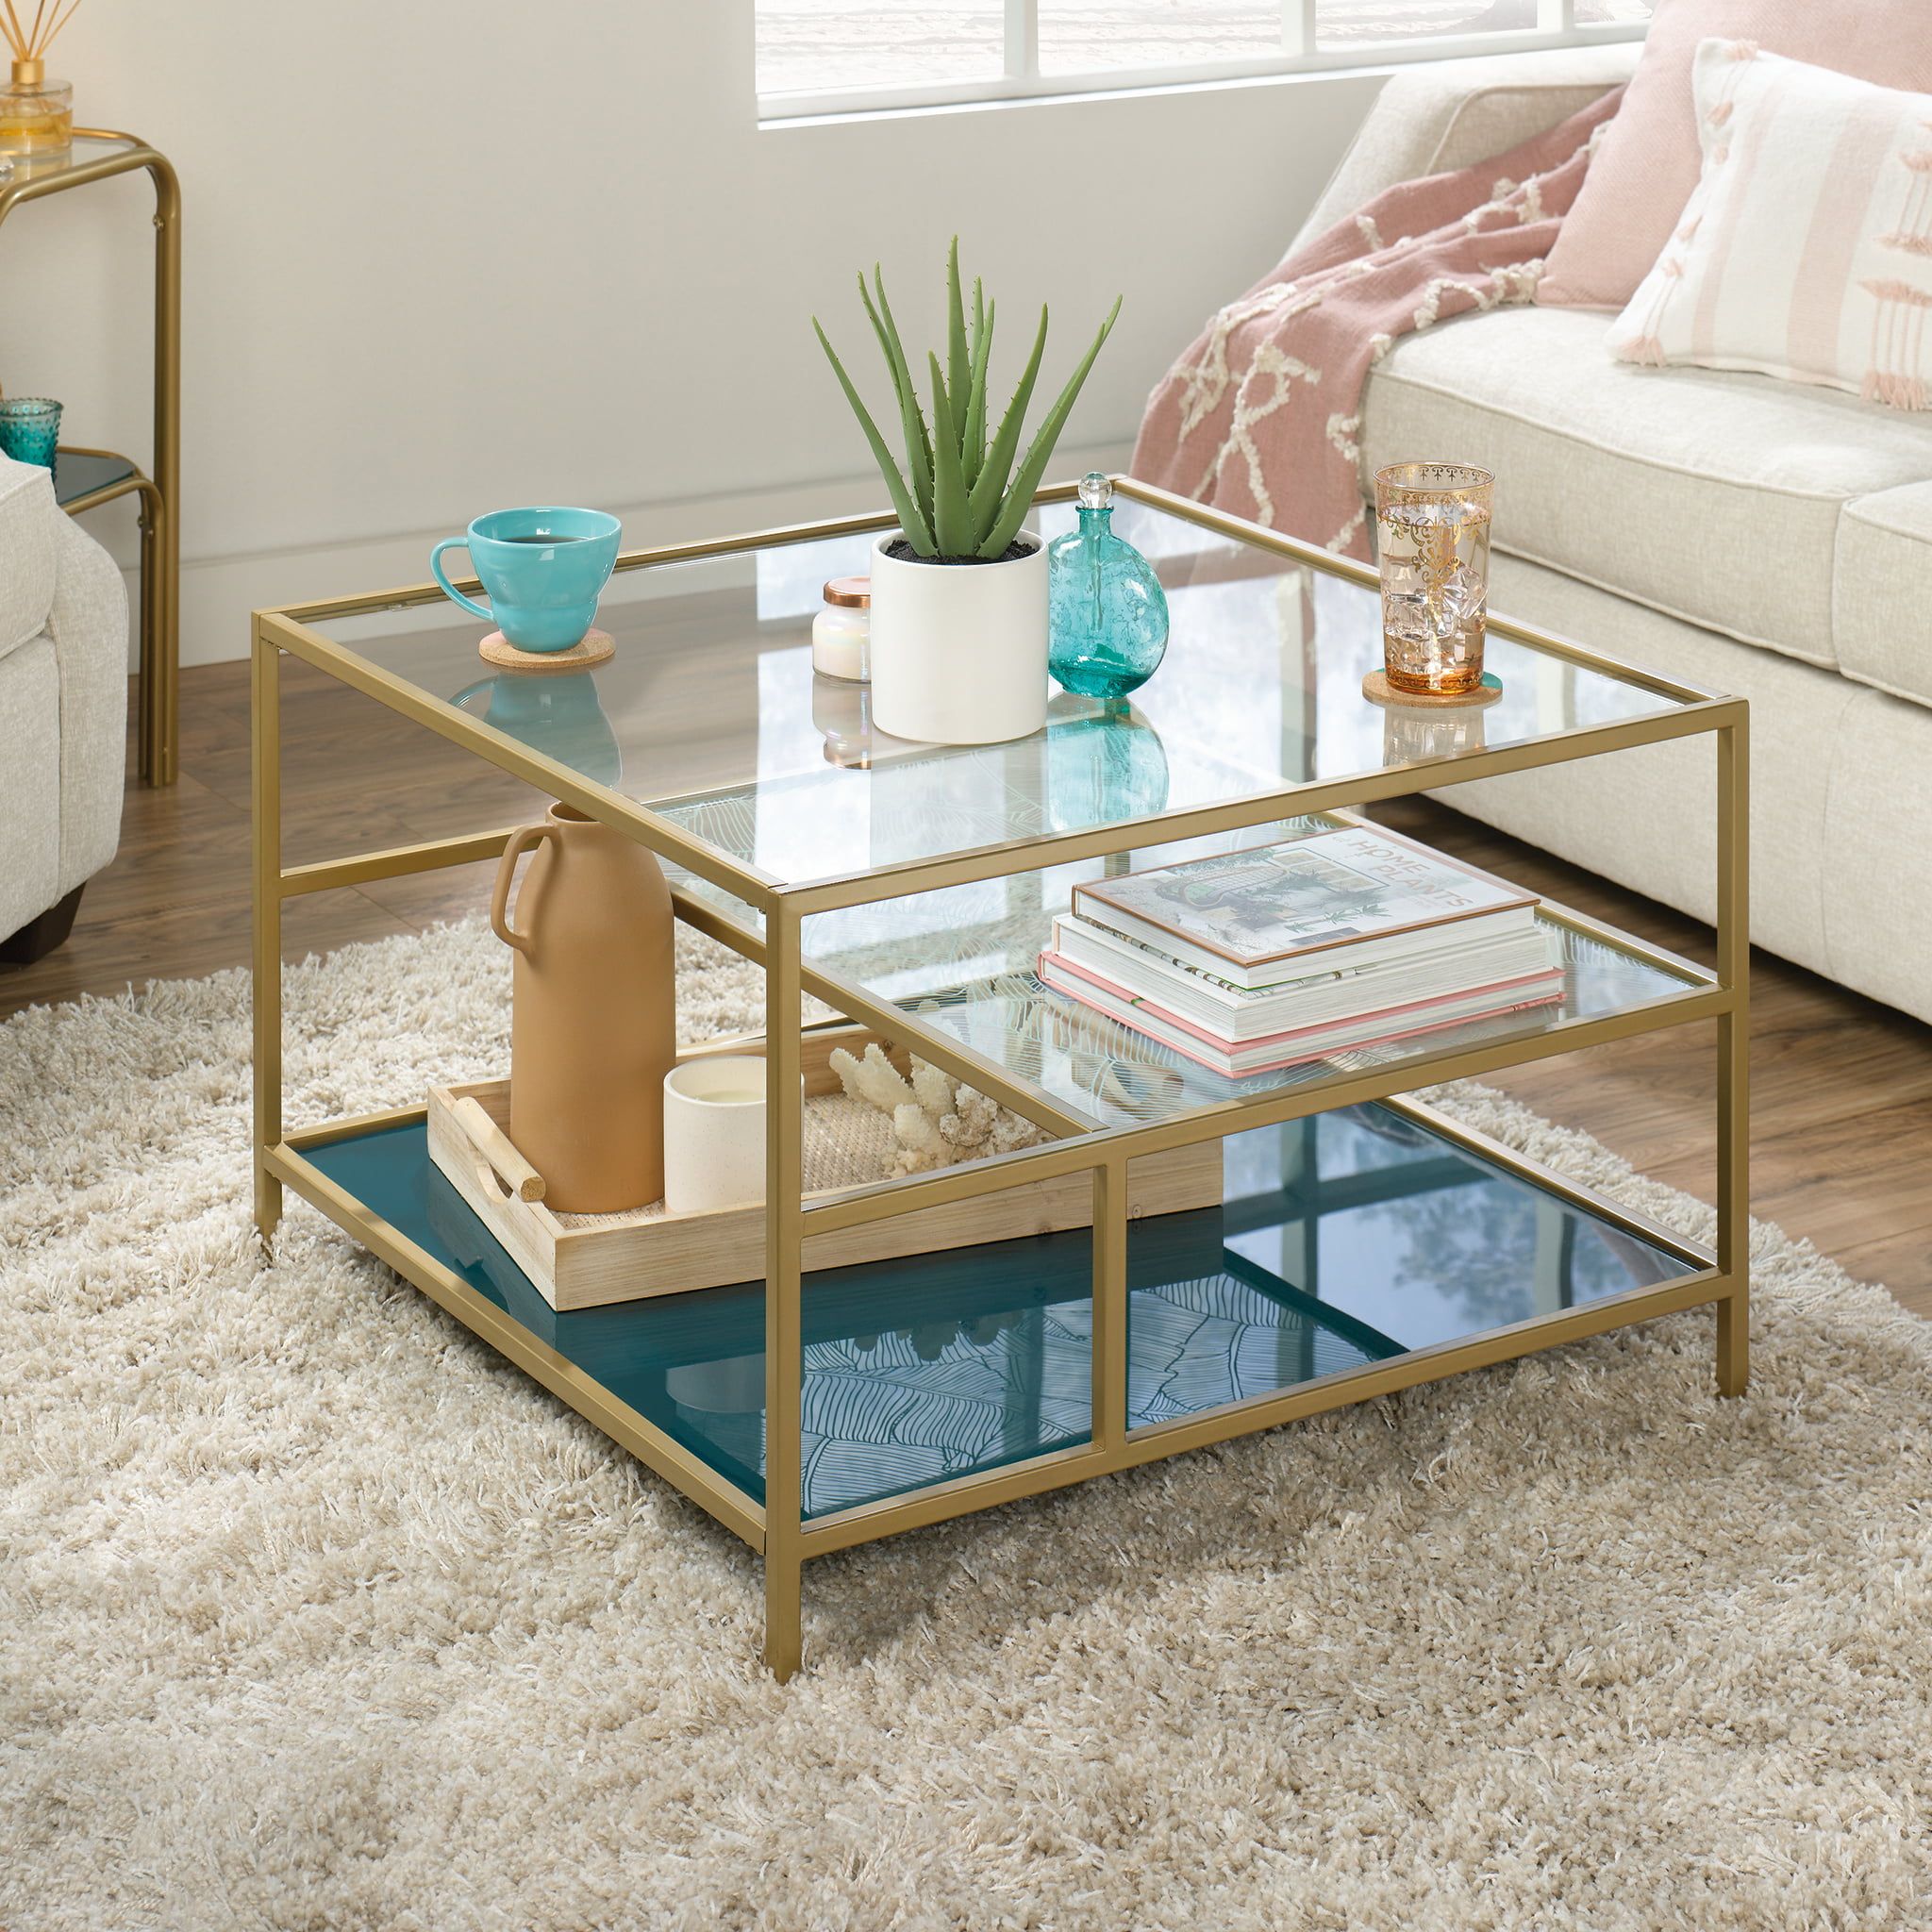 Sauder Coral Cape Square Glass Coffee Table With Shelves, Satin Gold/clear  – Walmart Regarding Satin Gold Coffee Tables (View 3 of 20)